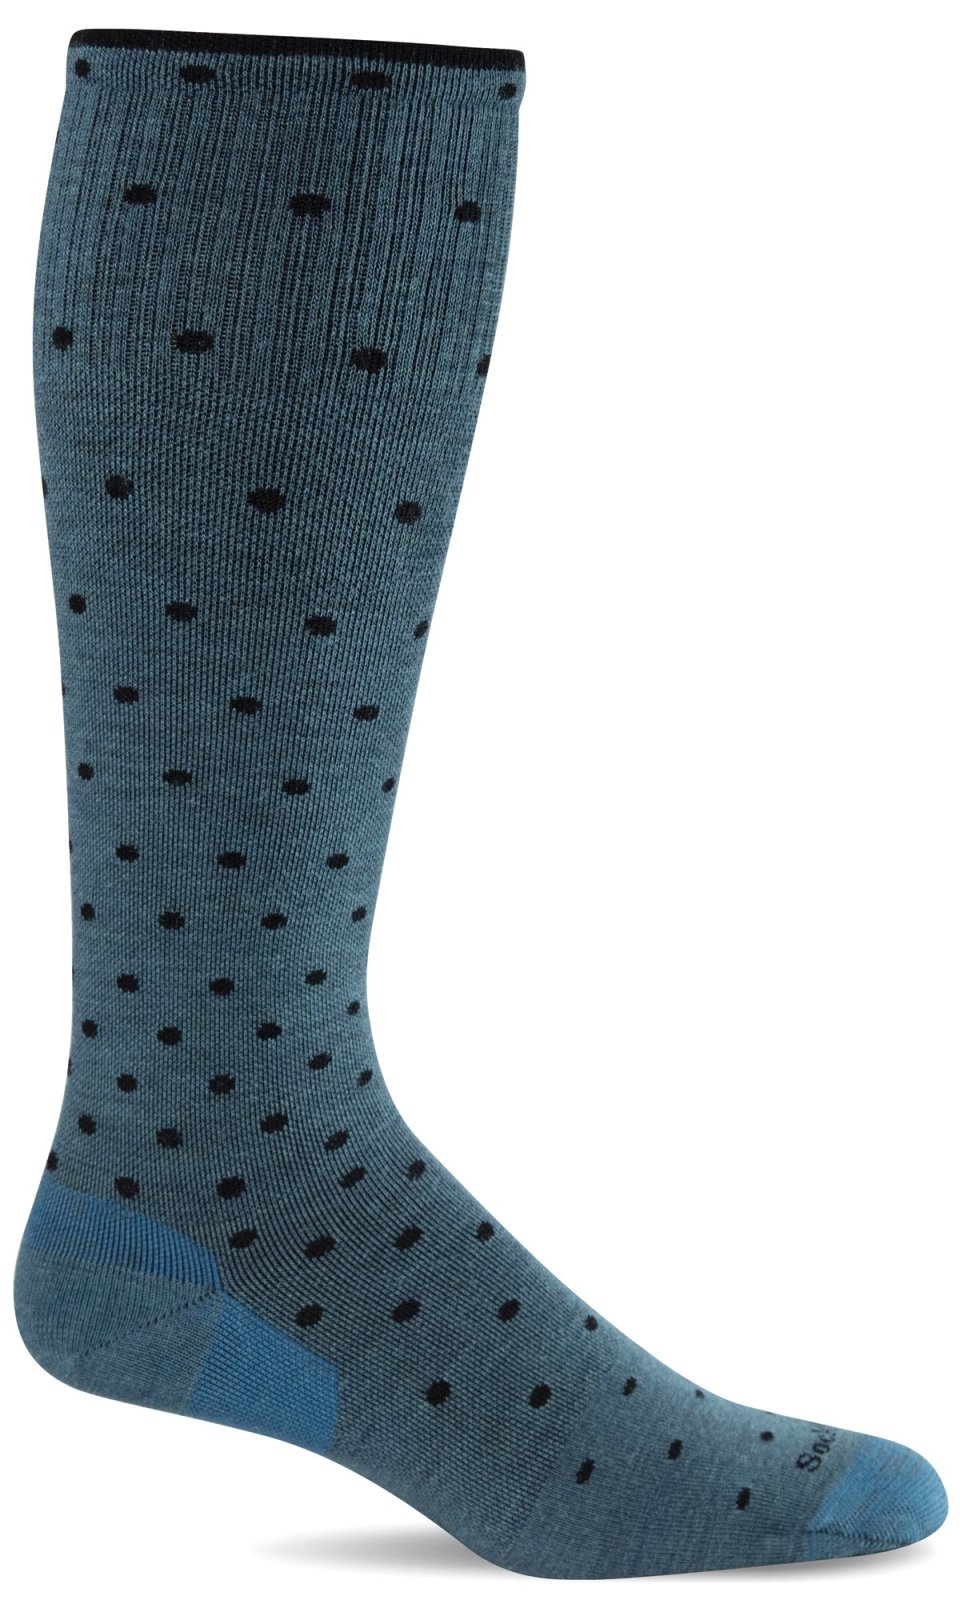 Women's On the Spot | Moderate Graduated Compression Socks - Merino Wool Lifestyle Compression - Sockwell